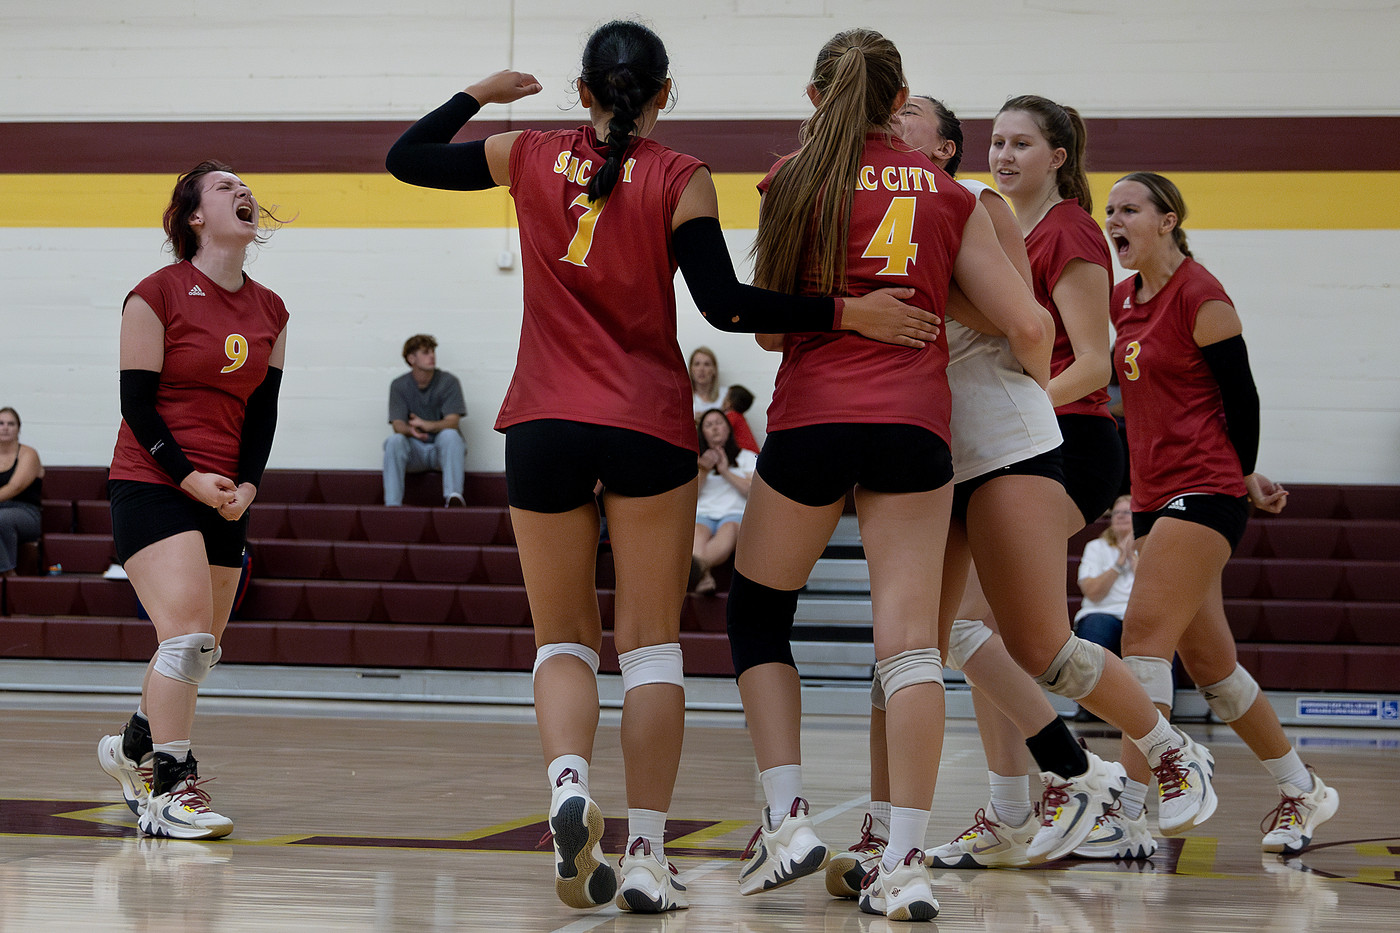 City opens up the De Anza Tri-Tourney with a 3-0 (25-16, 25-14, 25-20) win over Shasta